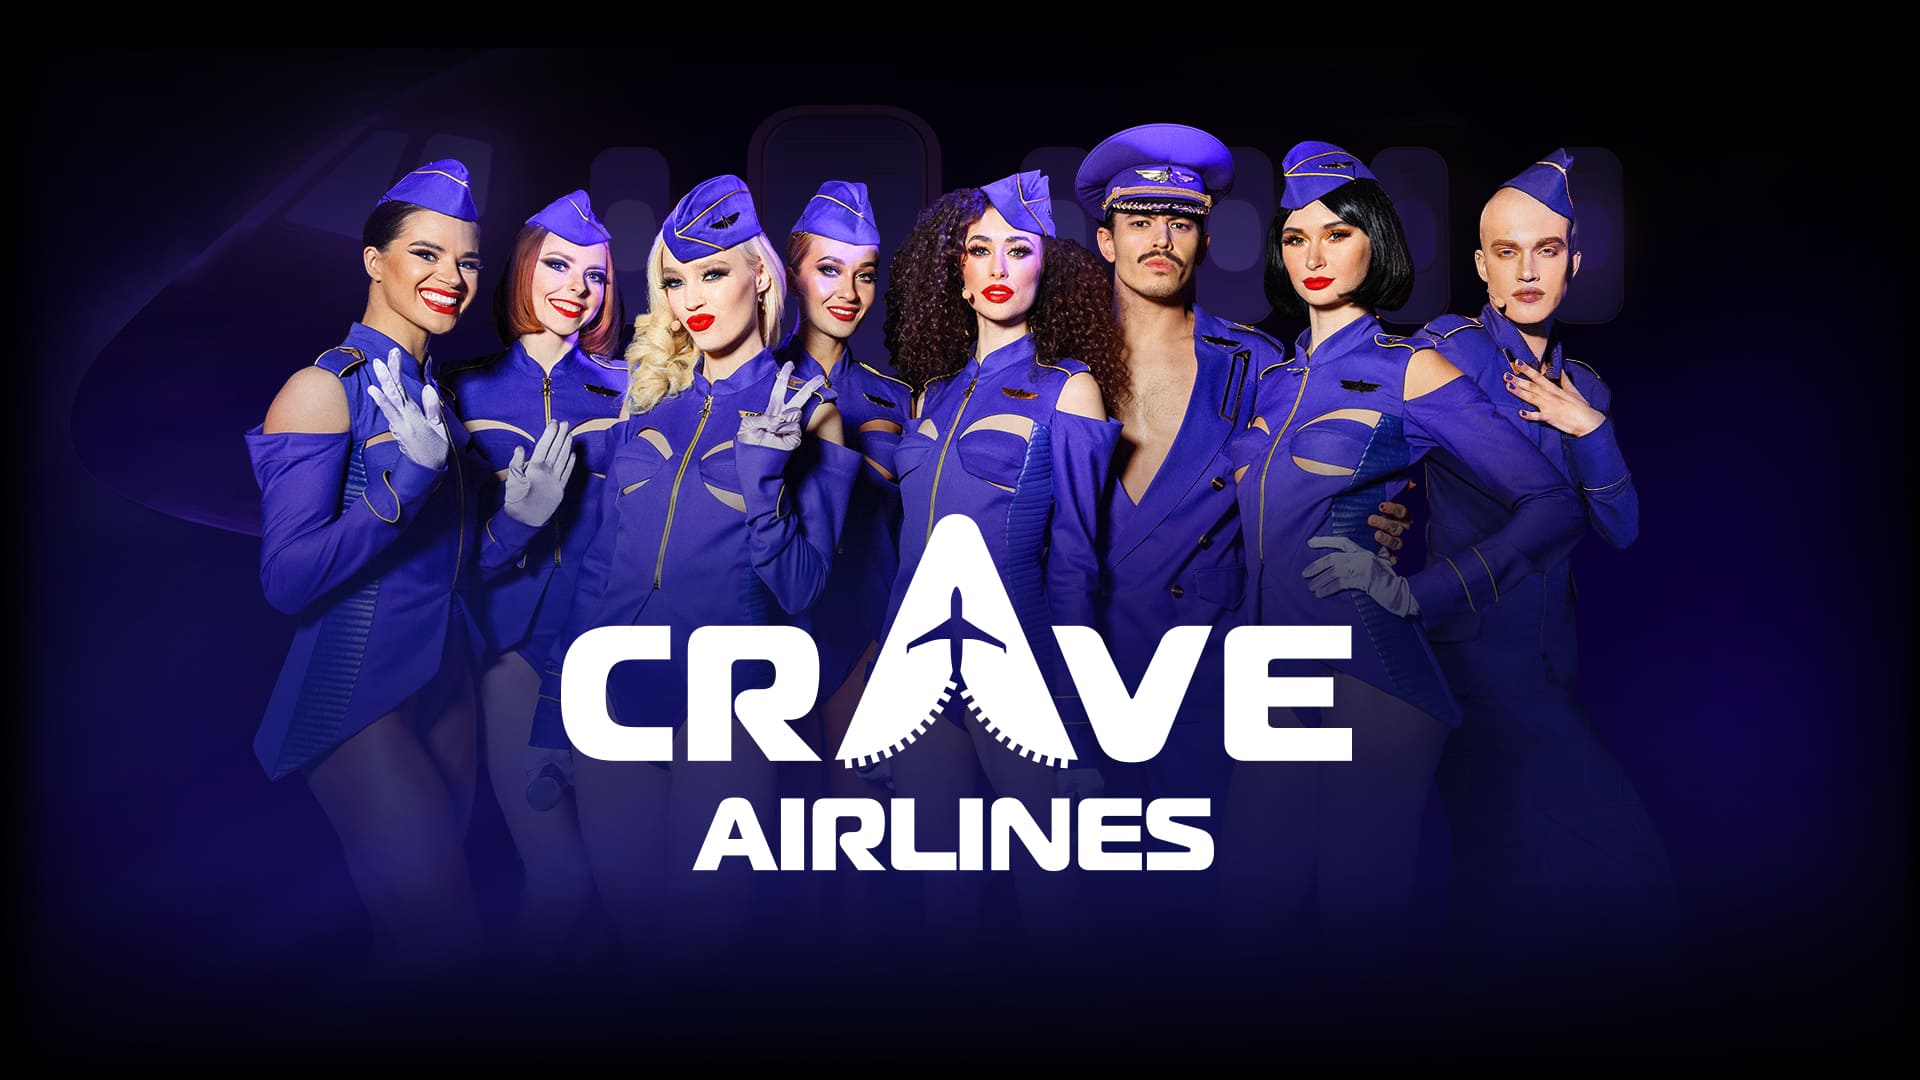 Crave airlines. Crave Airlines шоу. Шоу crave Airlines Ujkkst. Crave Airlines отзывы.